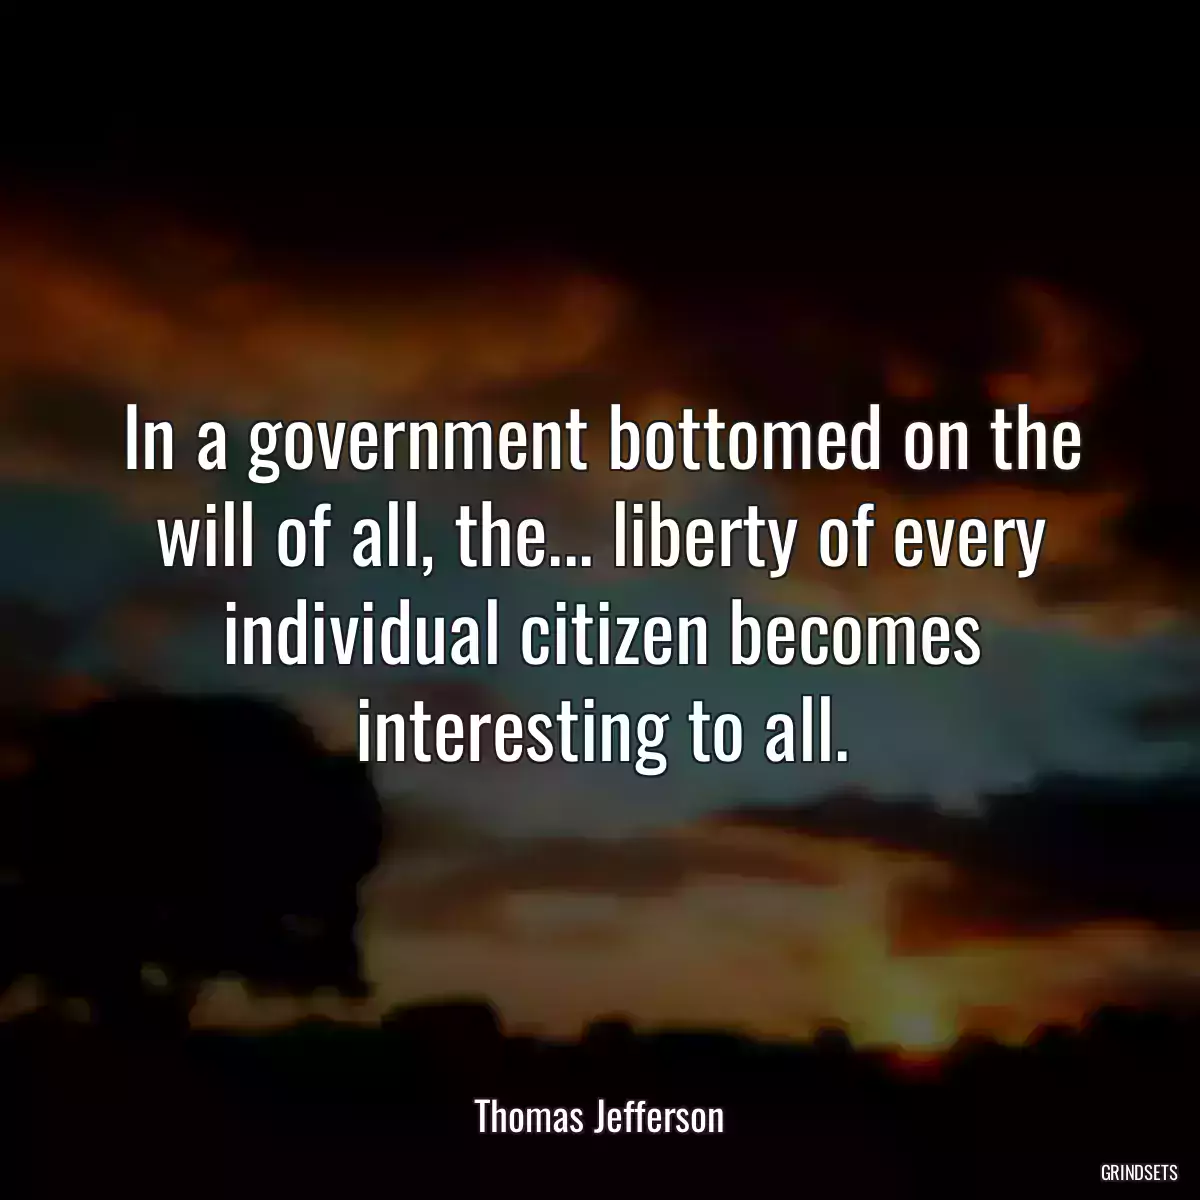 In a government bottomed on the will of all, the... liberty of every individual citizen becomes interesting to all.